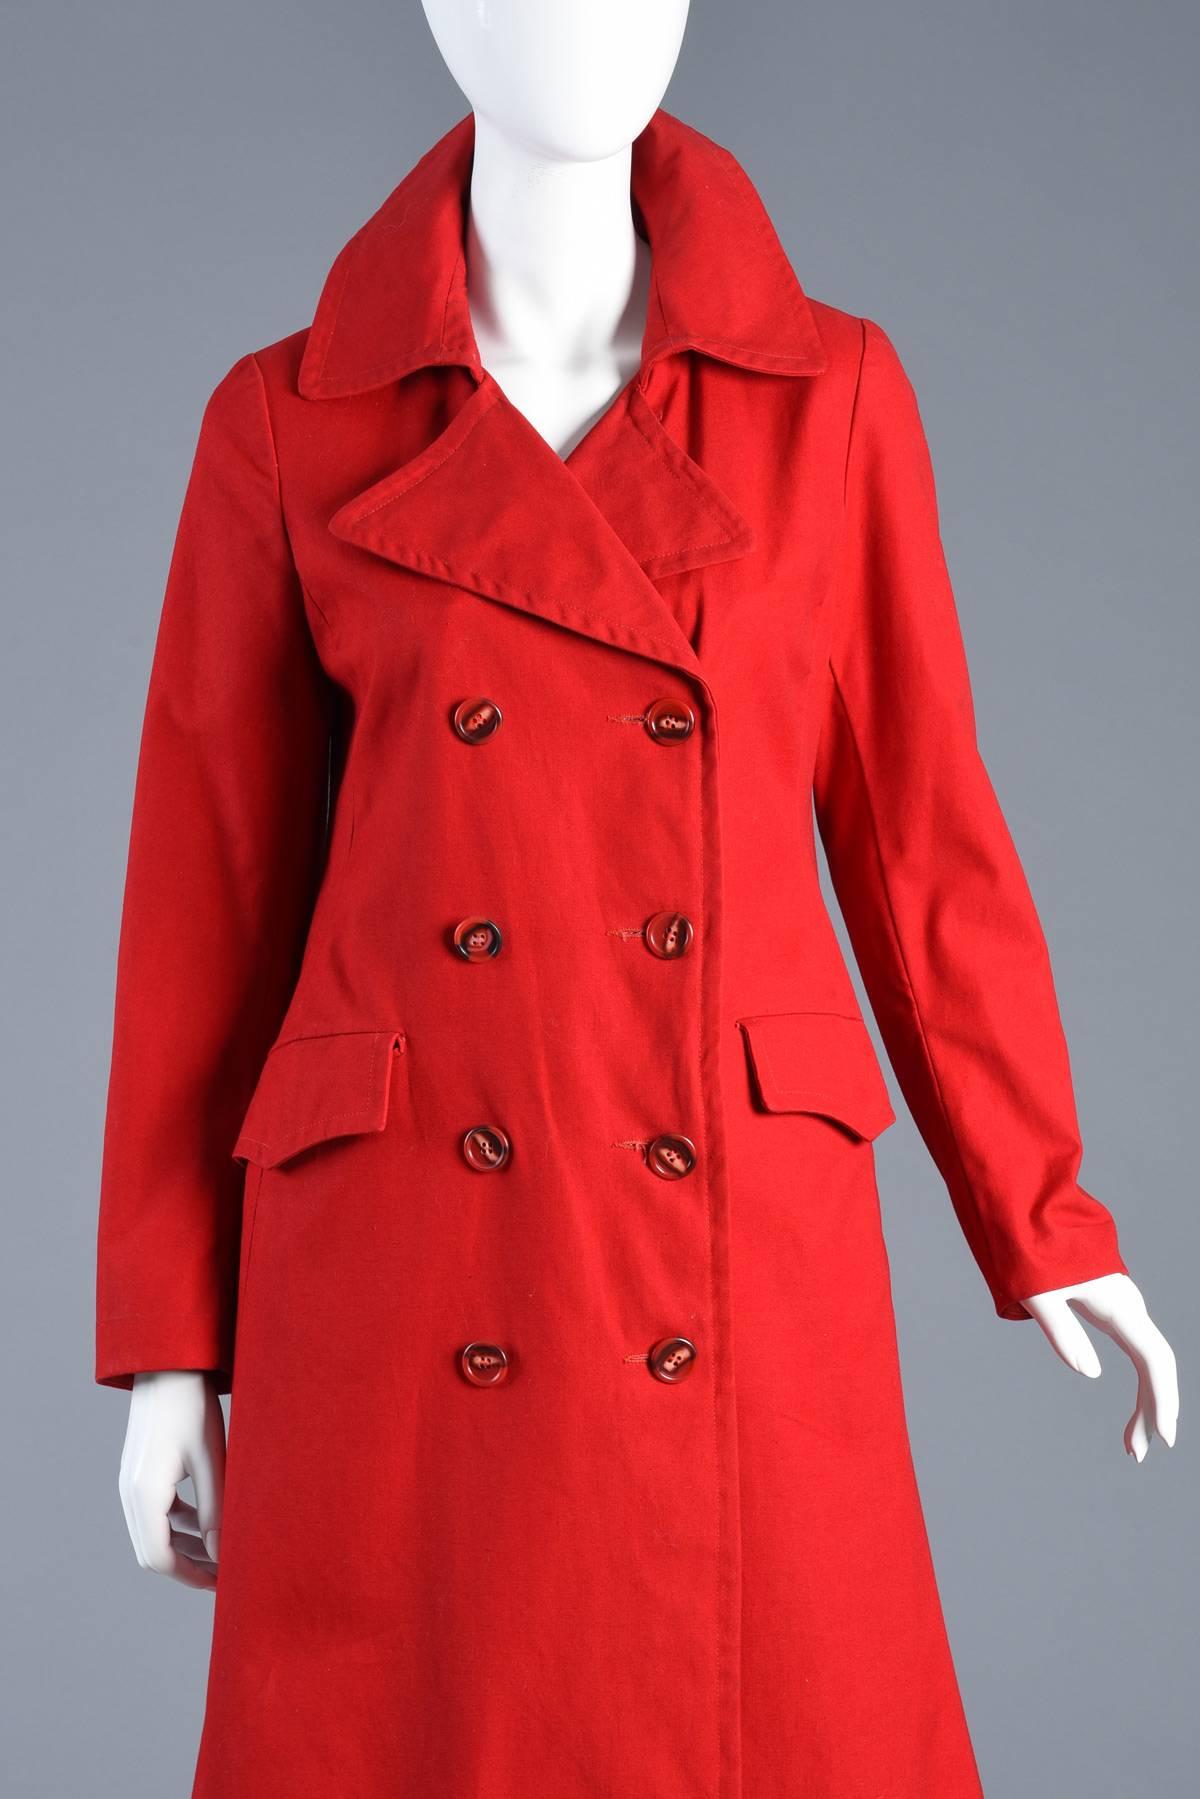 Women's Supermodel Length 1970s Cherry Red Flared Trench Coat For Sale